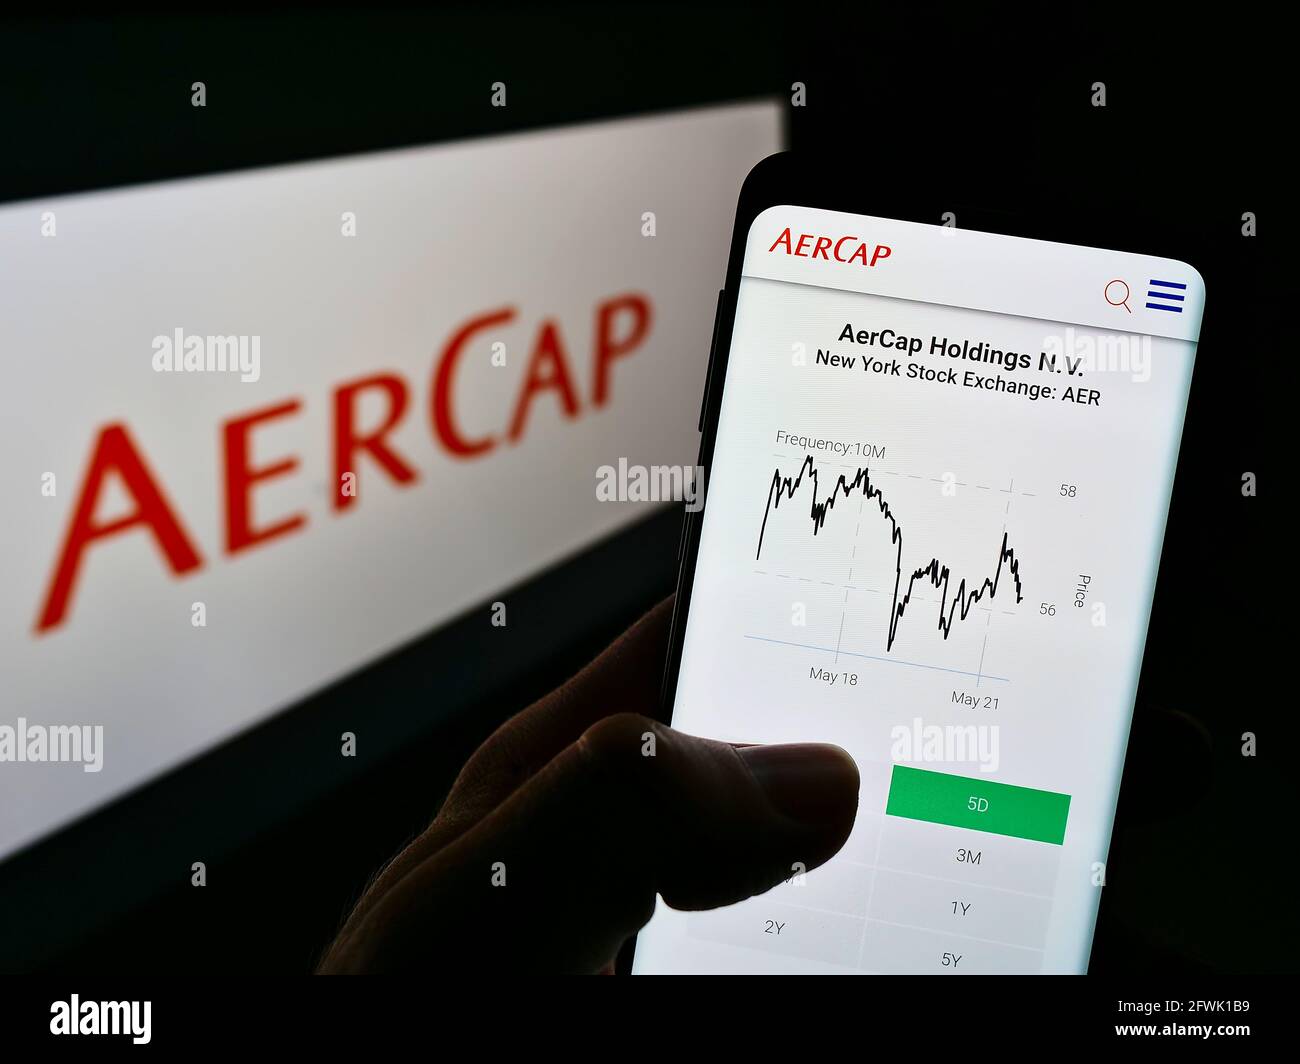 Person holding mobile phone with website of aircraft leasing company AerCap Holdings NV on screen in front of logo. Focus on center of phone display. Stock Photo